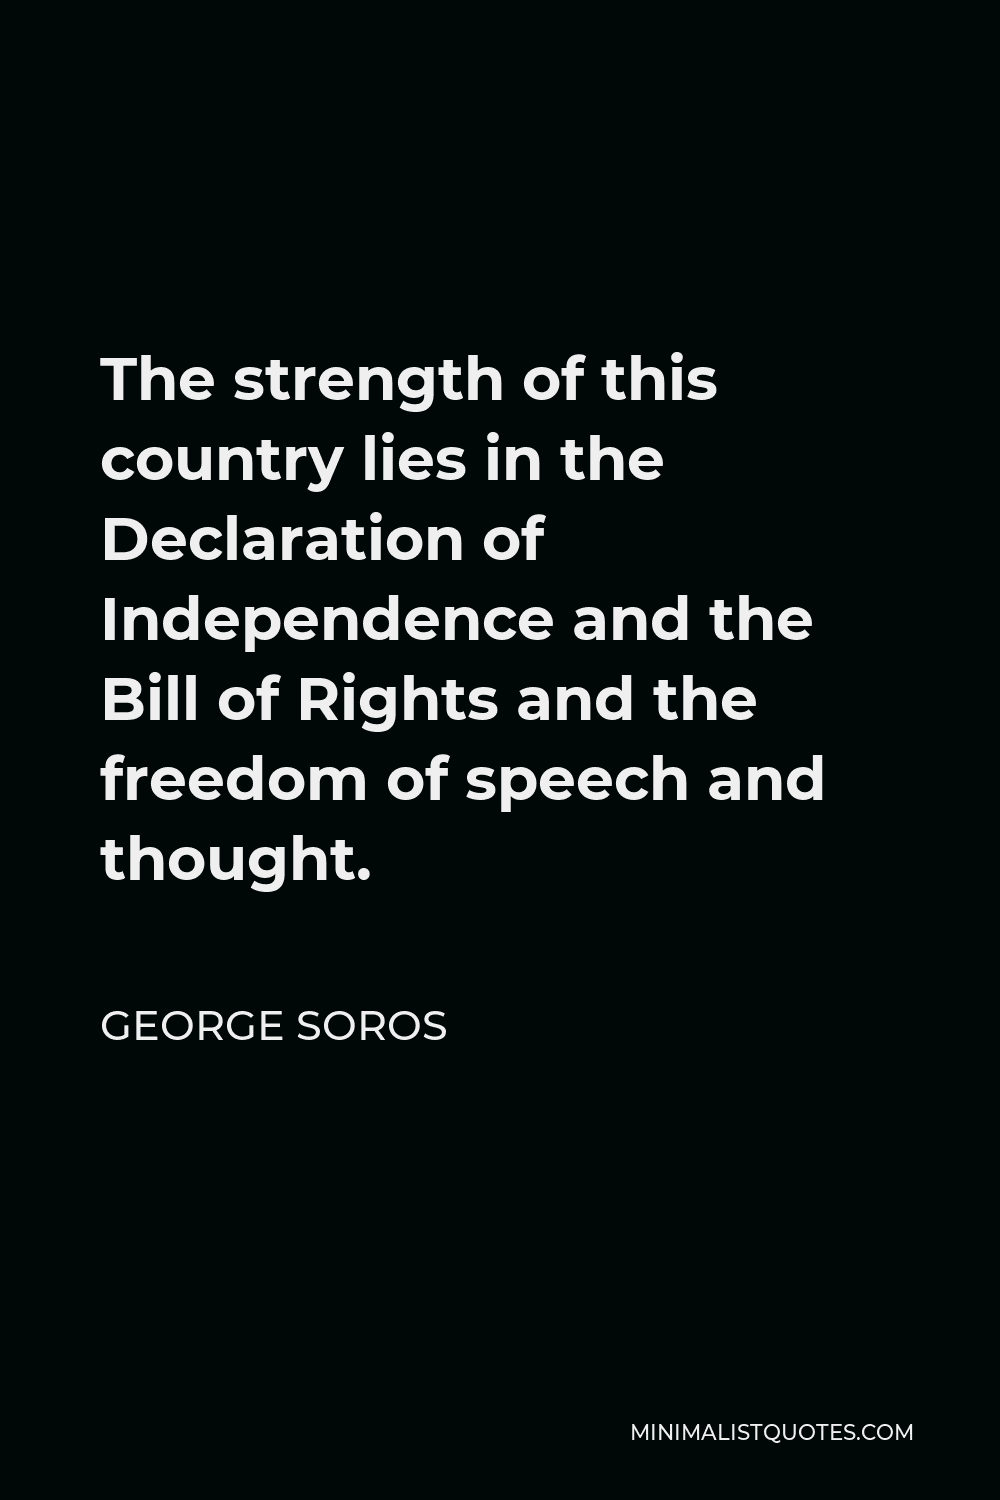 George Soros Quote - The strength of this country lies in the Declaration of Independence and the Bill of Rights and the freedom of speech and thought.